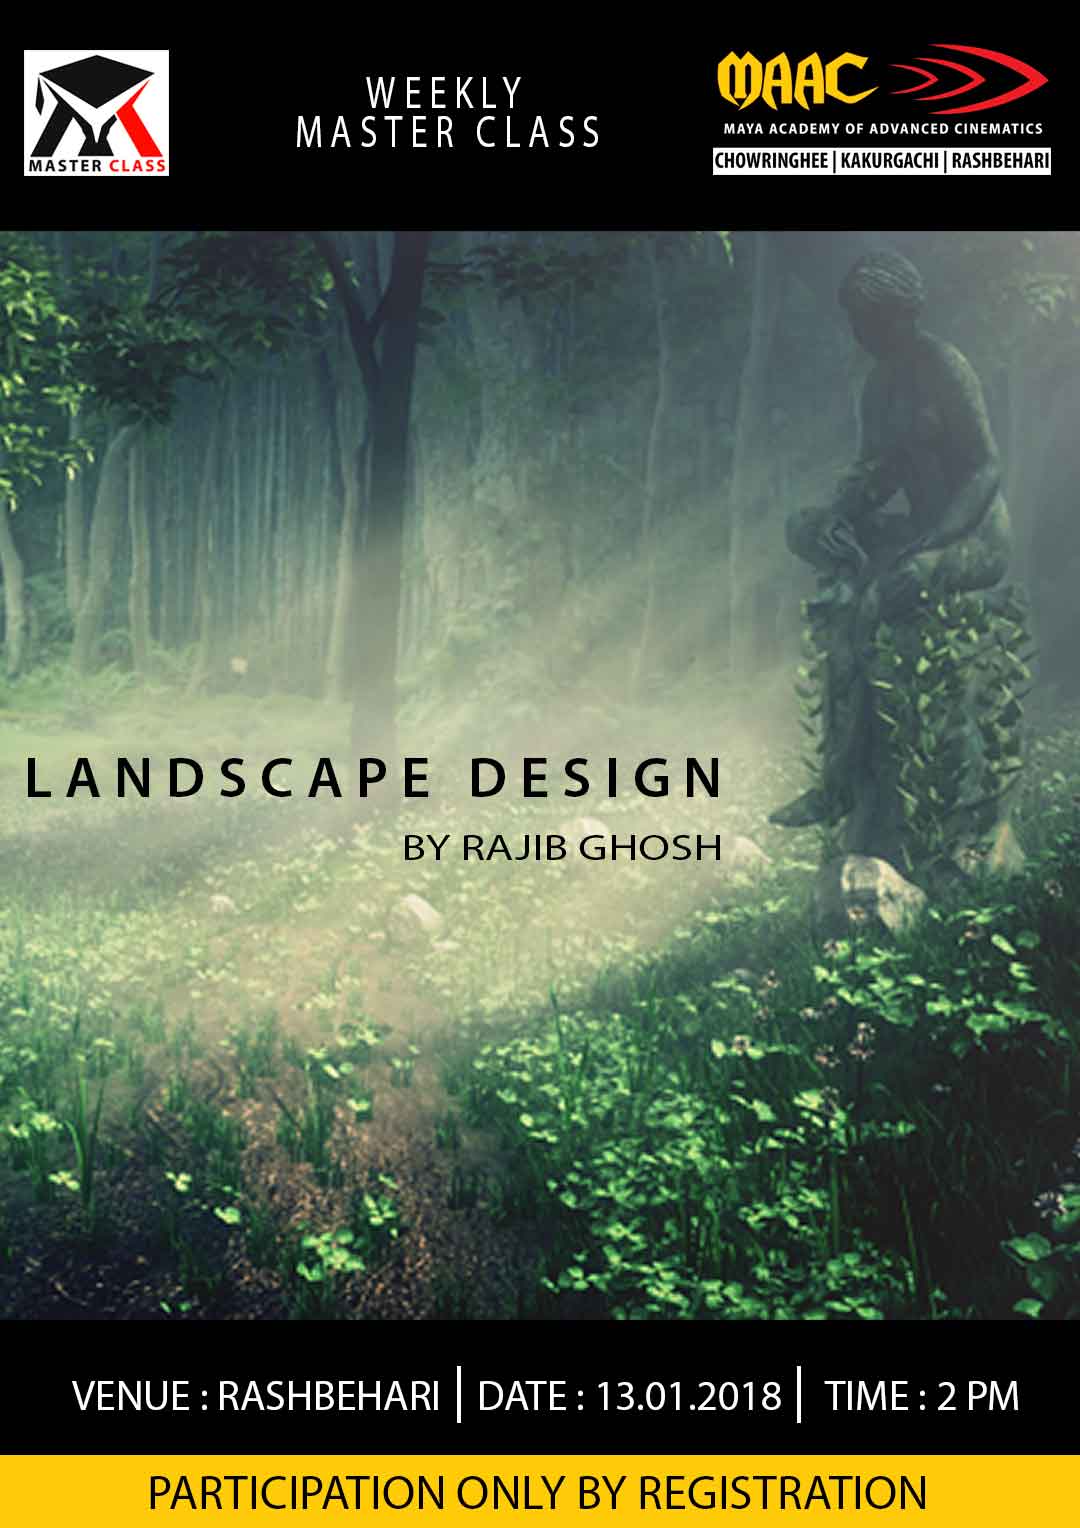 Weekly Master Class on Landscape Design